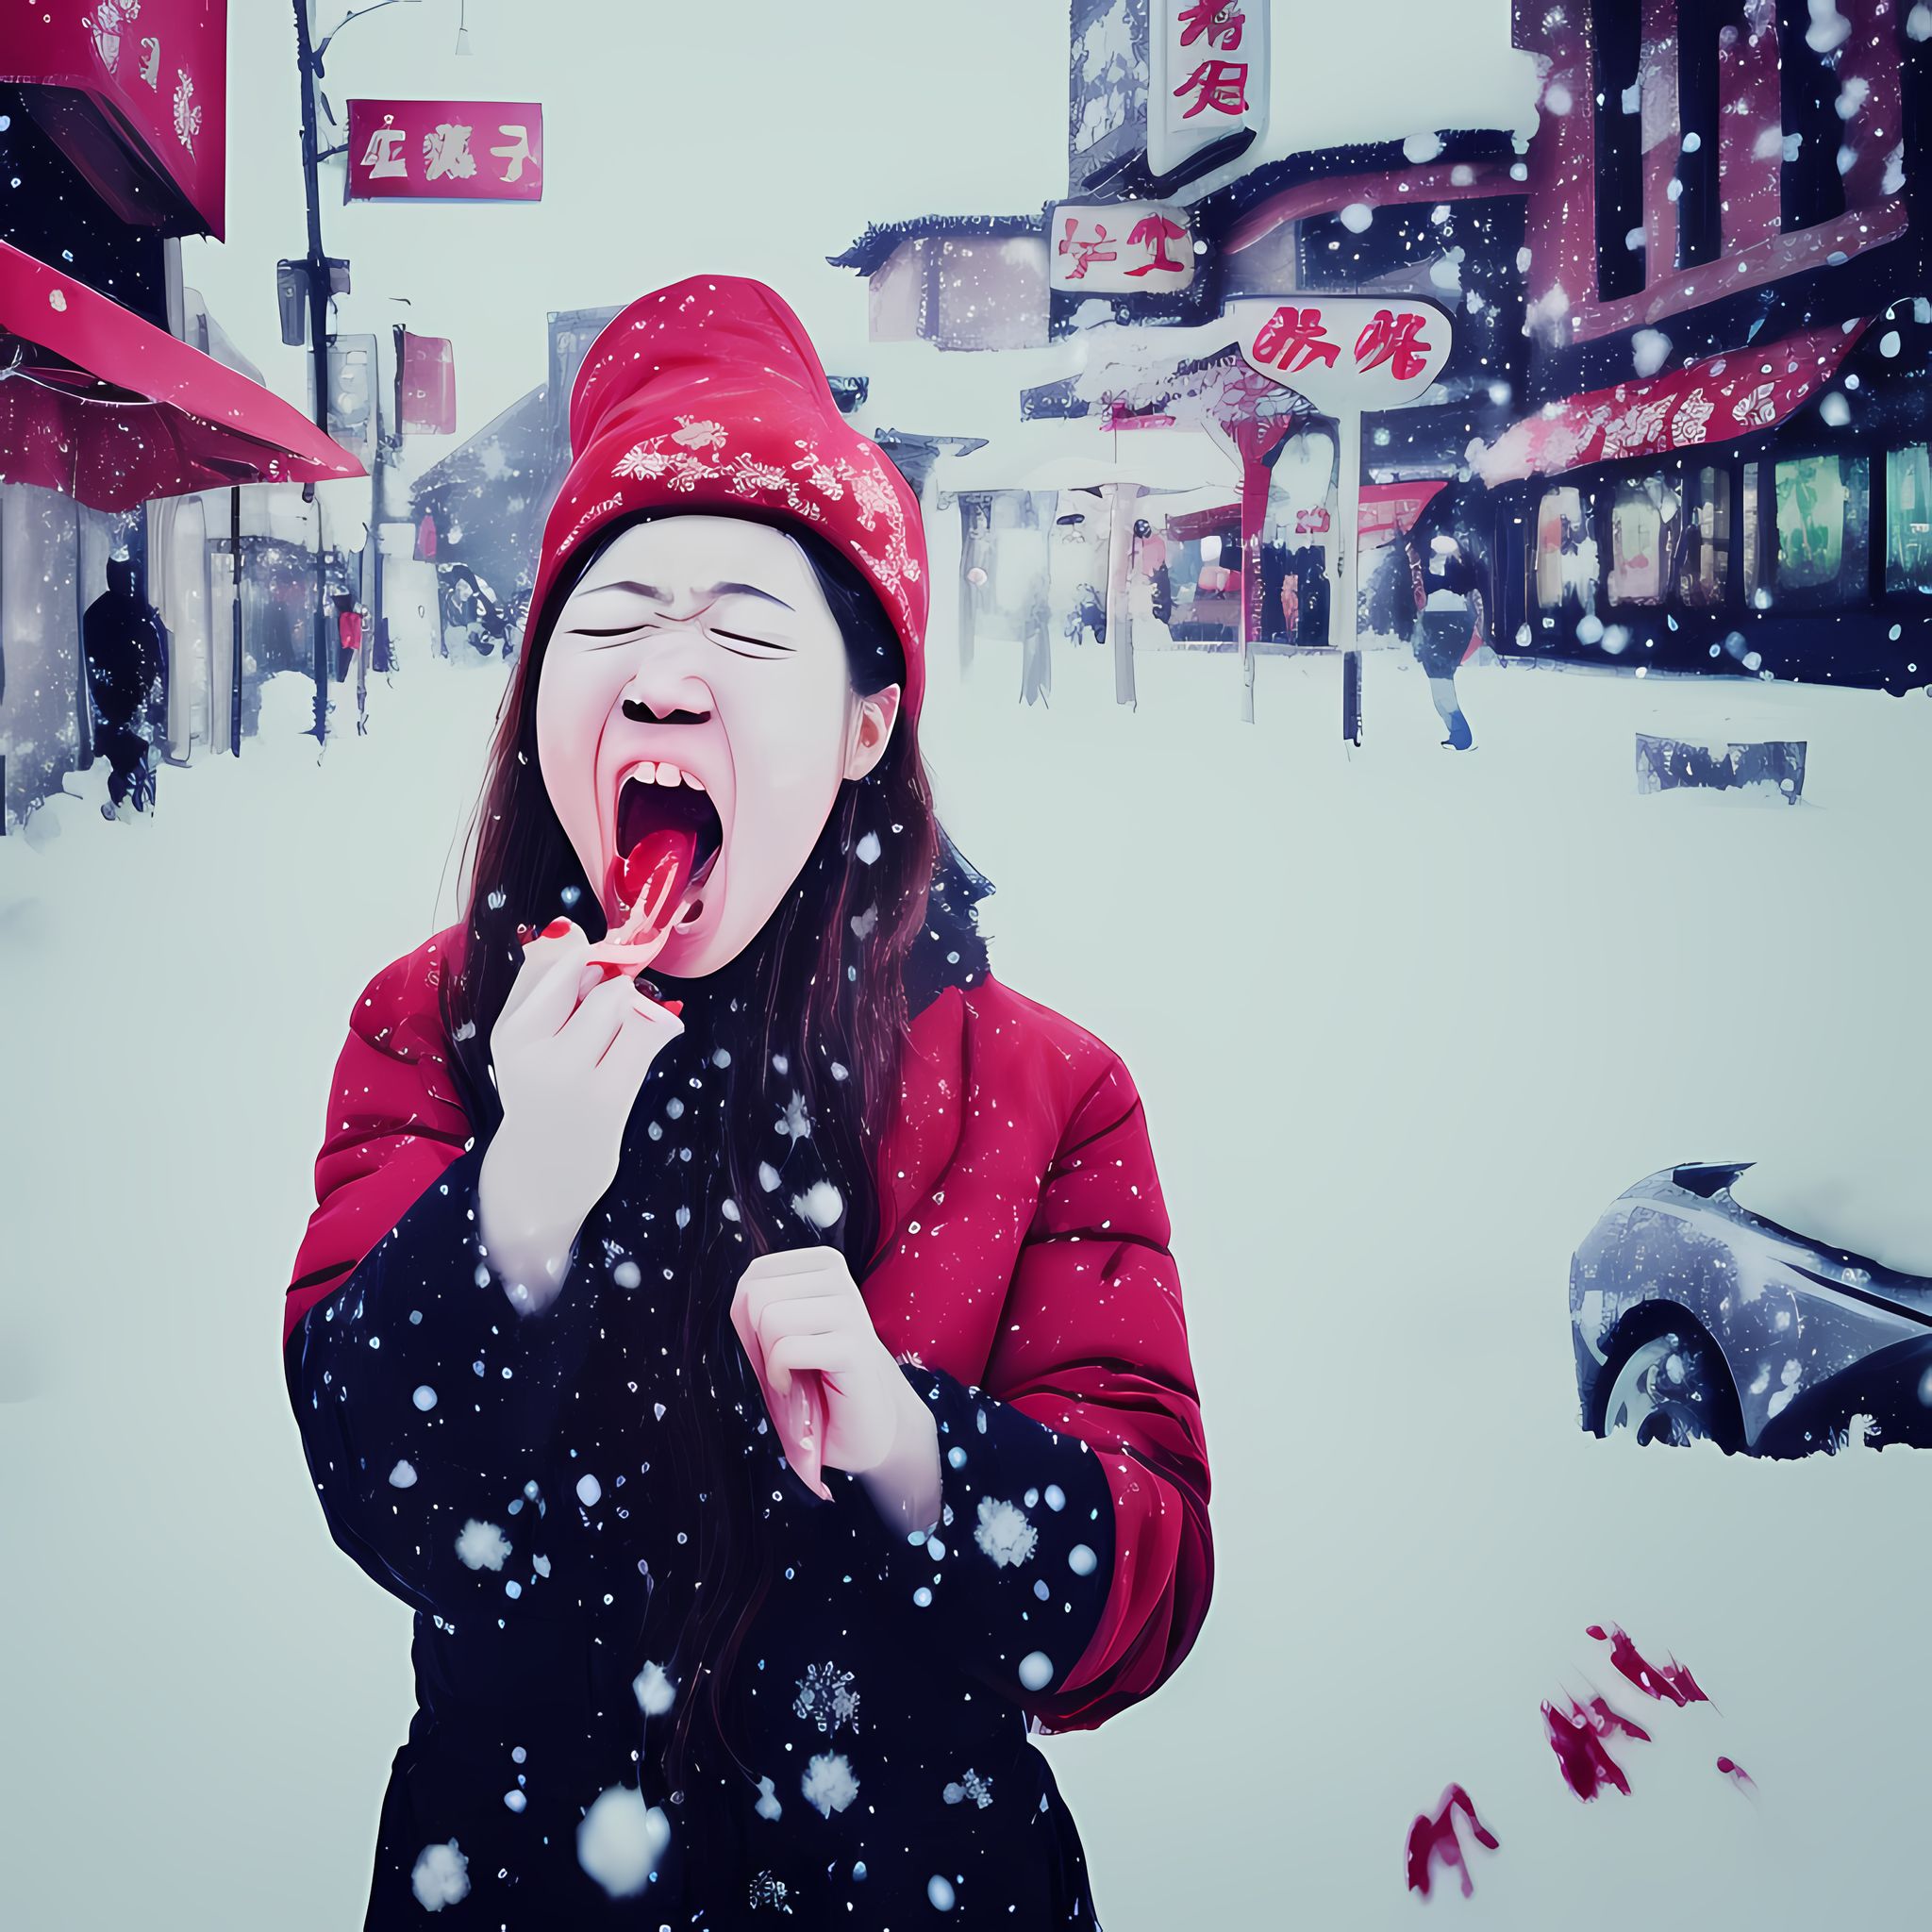 Painting-of-Chinese-food-Girl-shouting-winter-snow-person-eating-cold-color-sharp-focus-face-7njw